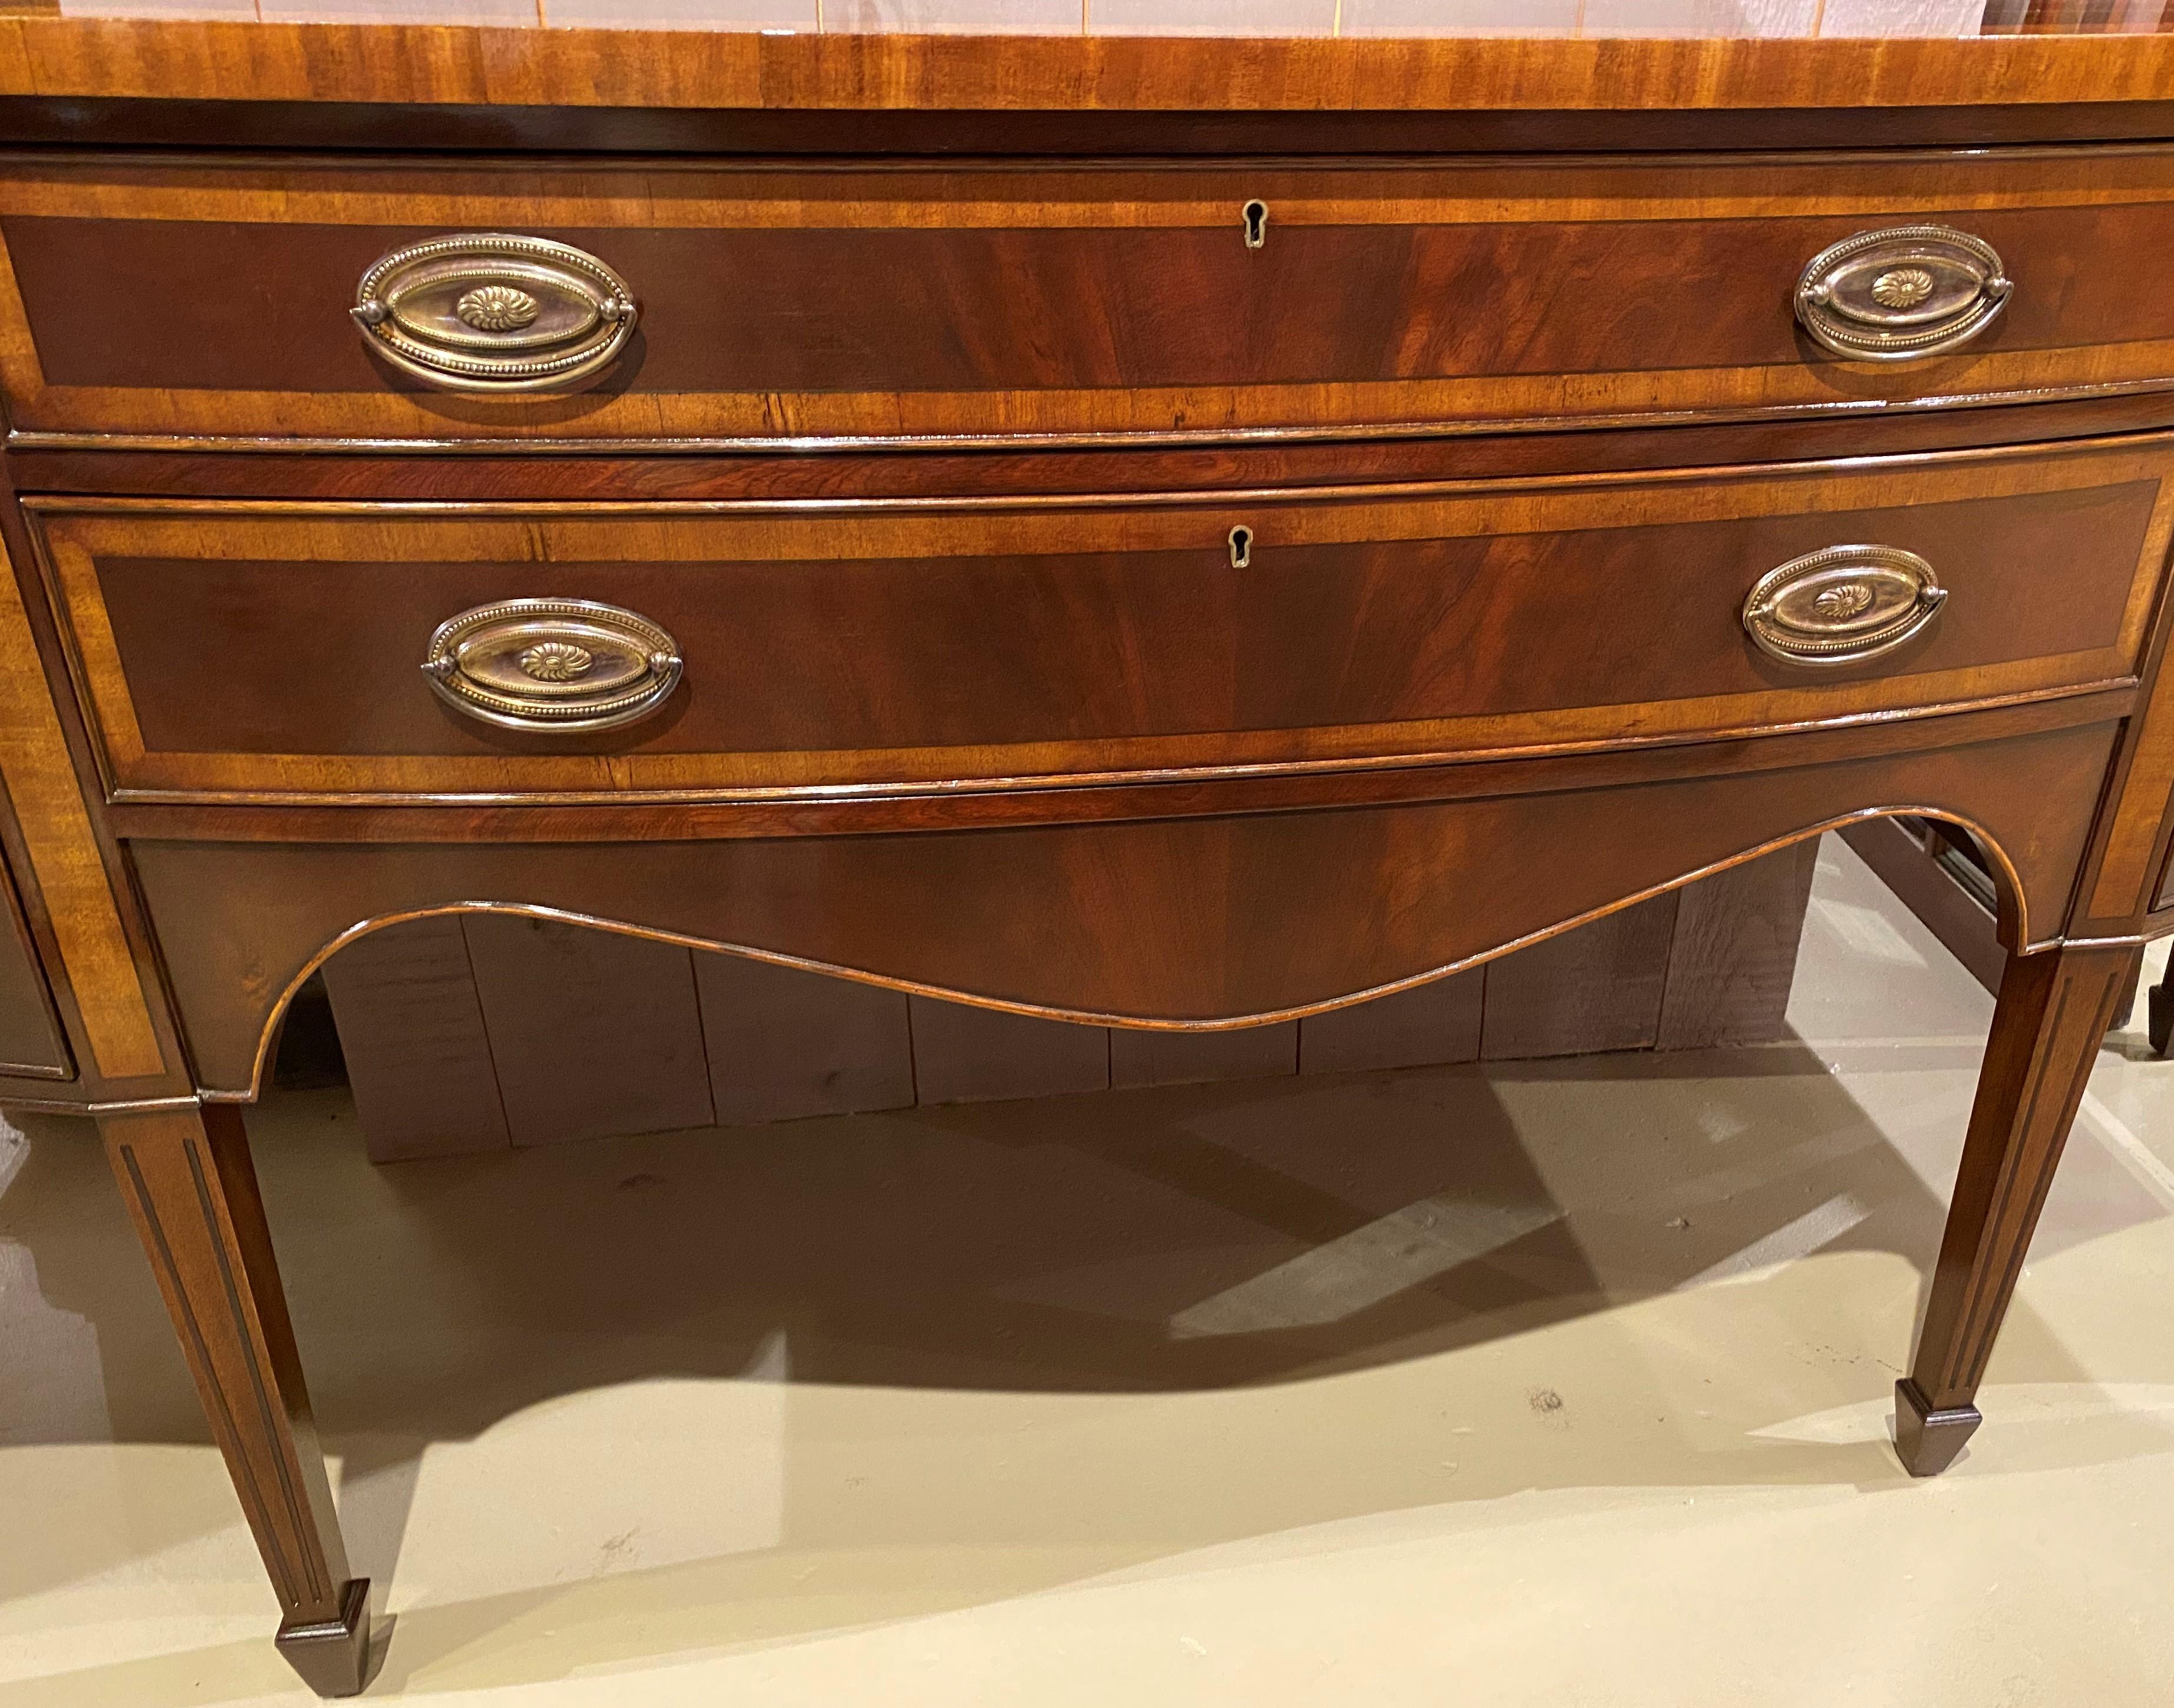 Hand-Crafted Trosby Furniture Sussex Georgian Style Sideboard in Mahogany and Inlaid Yew Wood